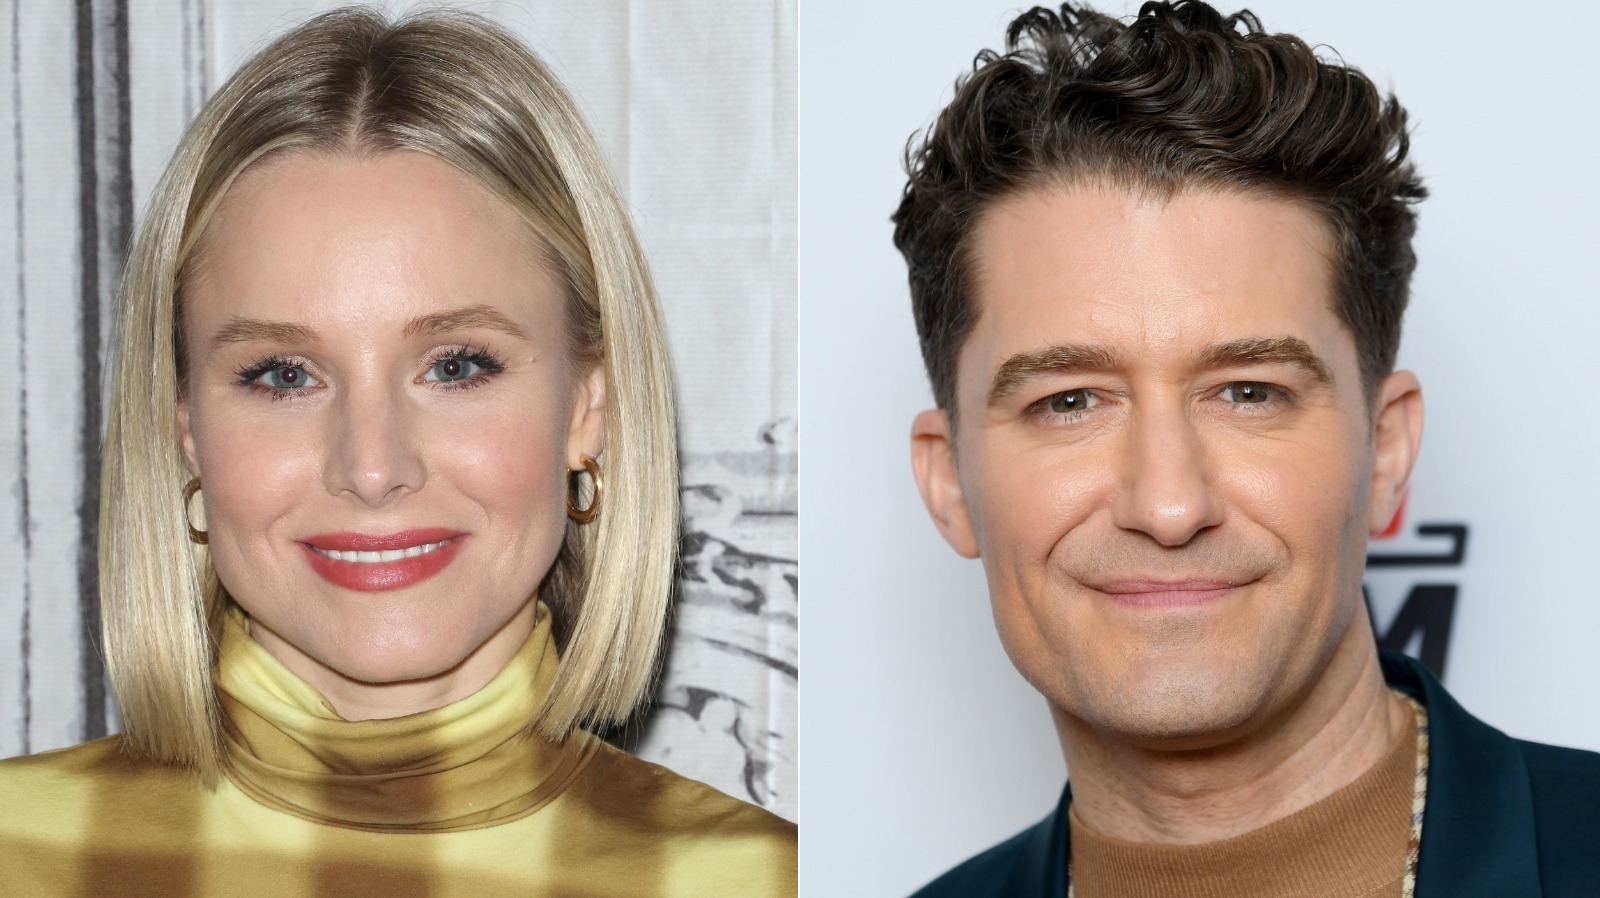 The Truth About Kristen Bell And Matthew Morrison's Romance